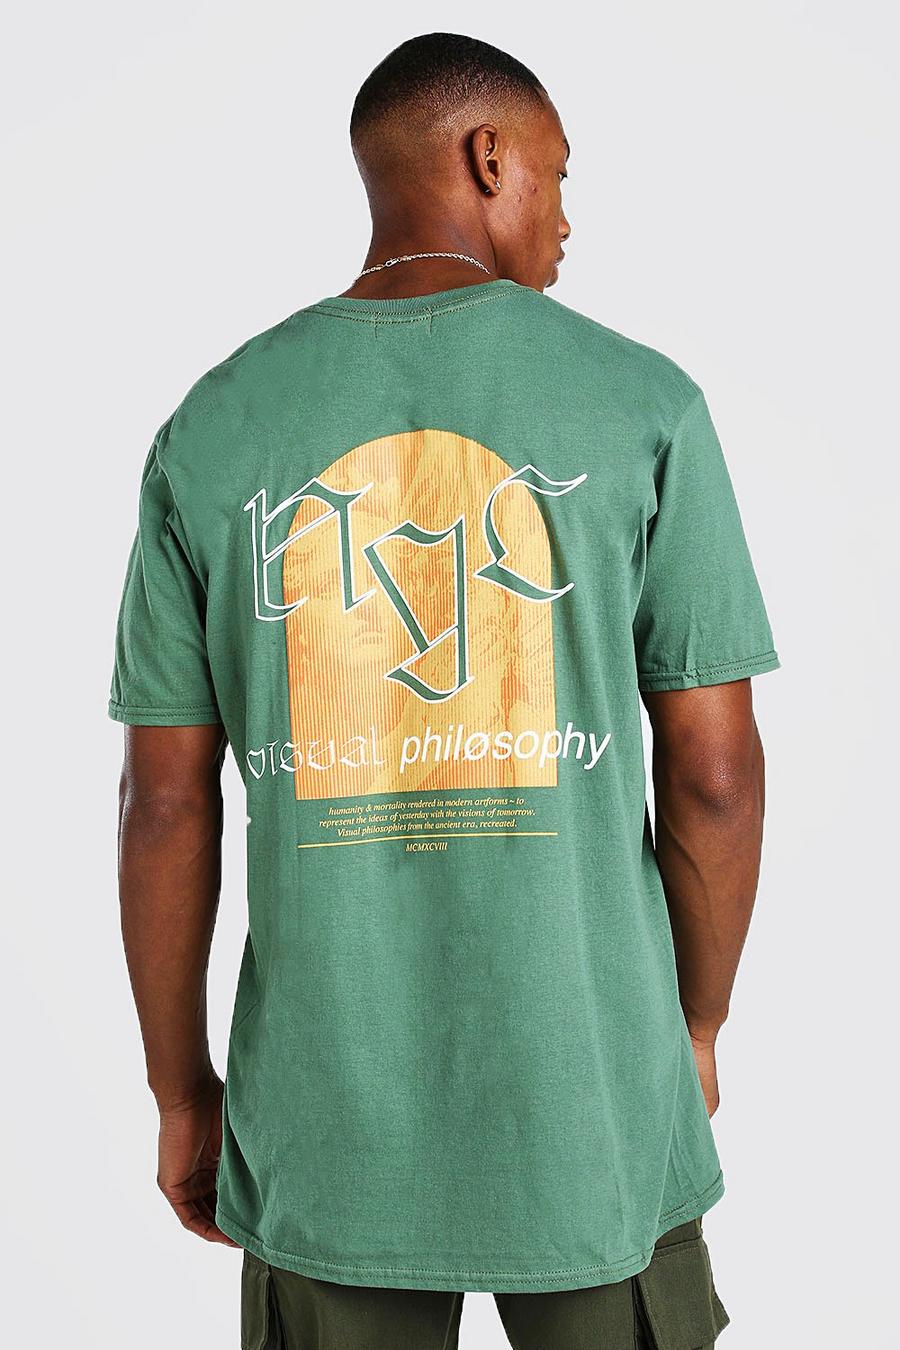 Green Oversized NYC Philosophy Print T-Shirt image number 1